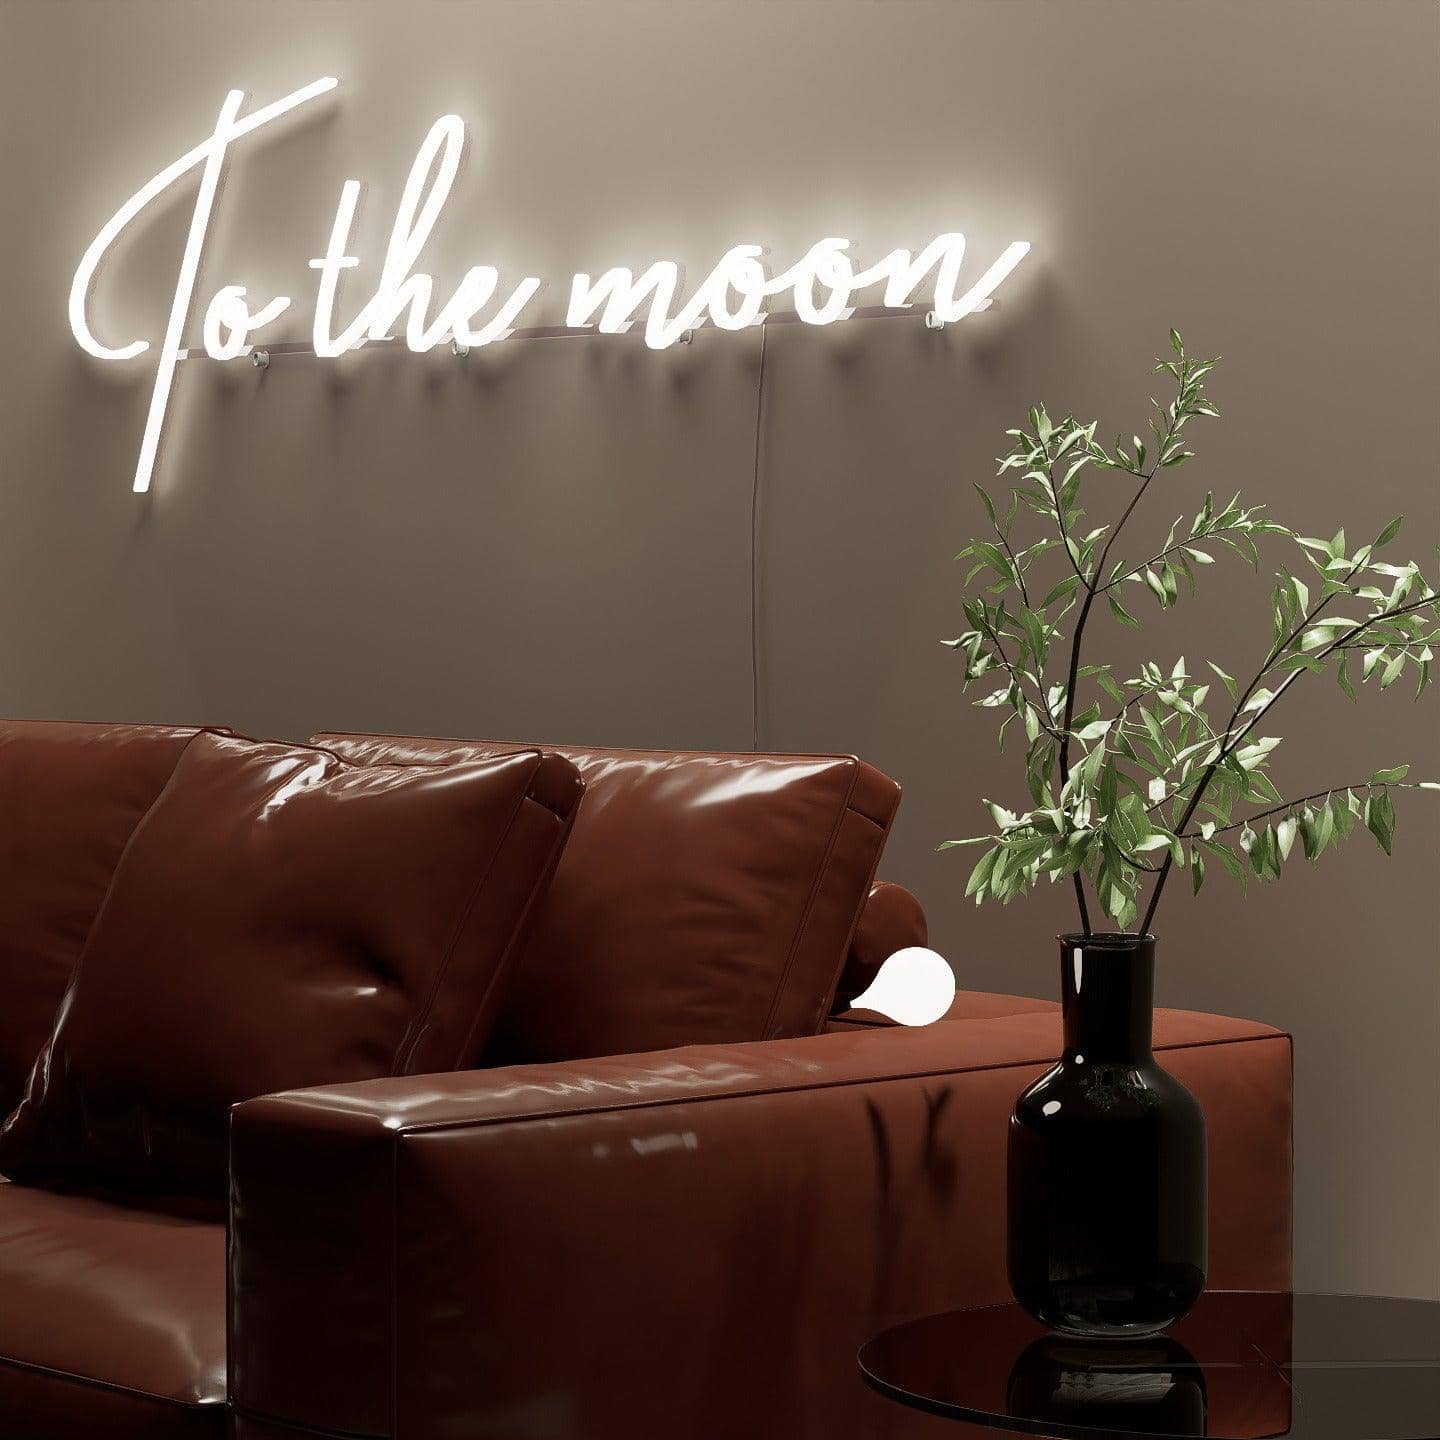 Side shot of lit white neon hanging on wall-to the moon